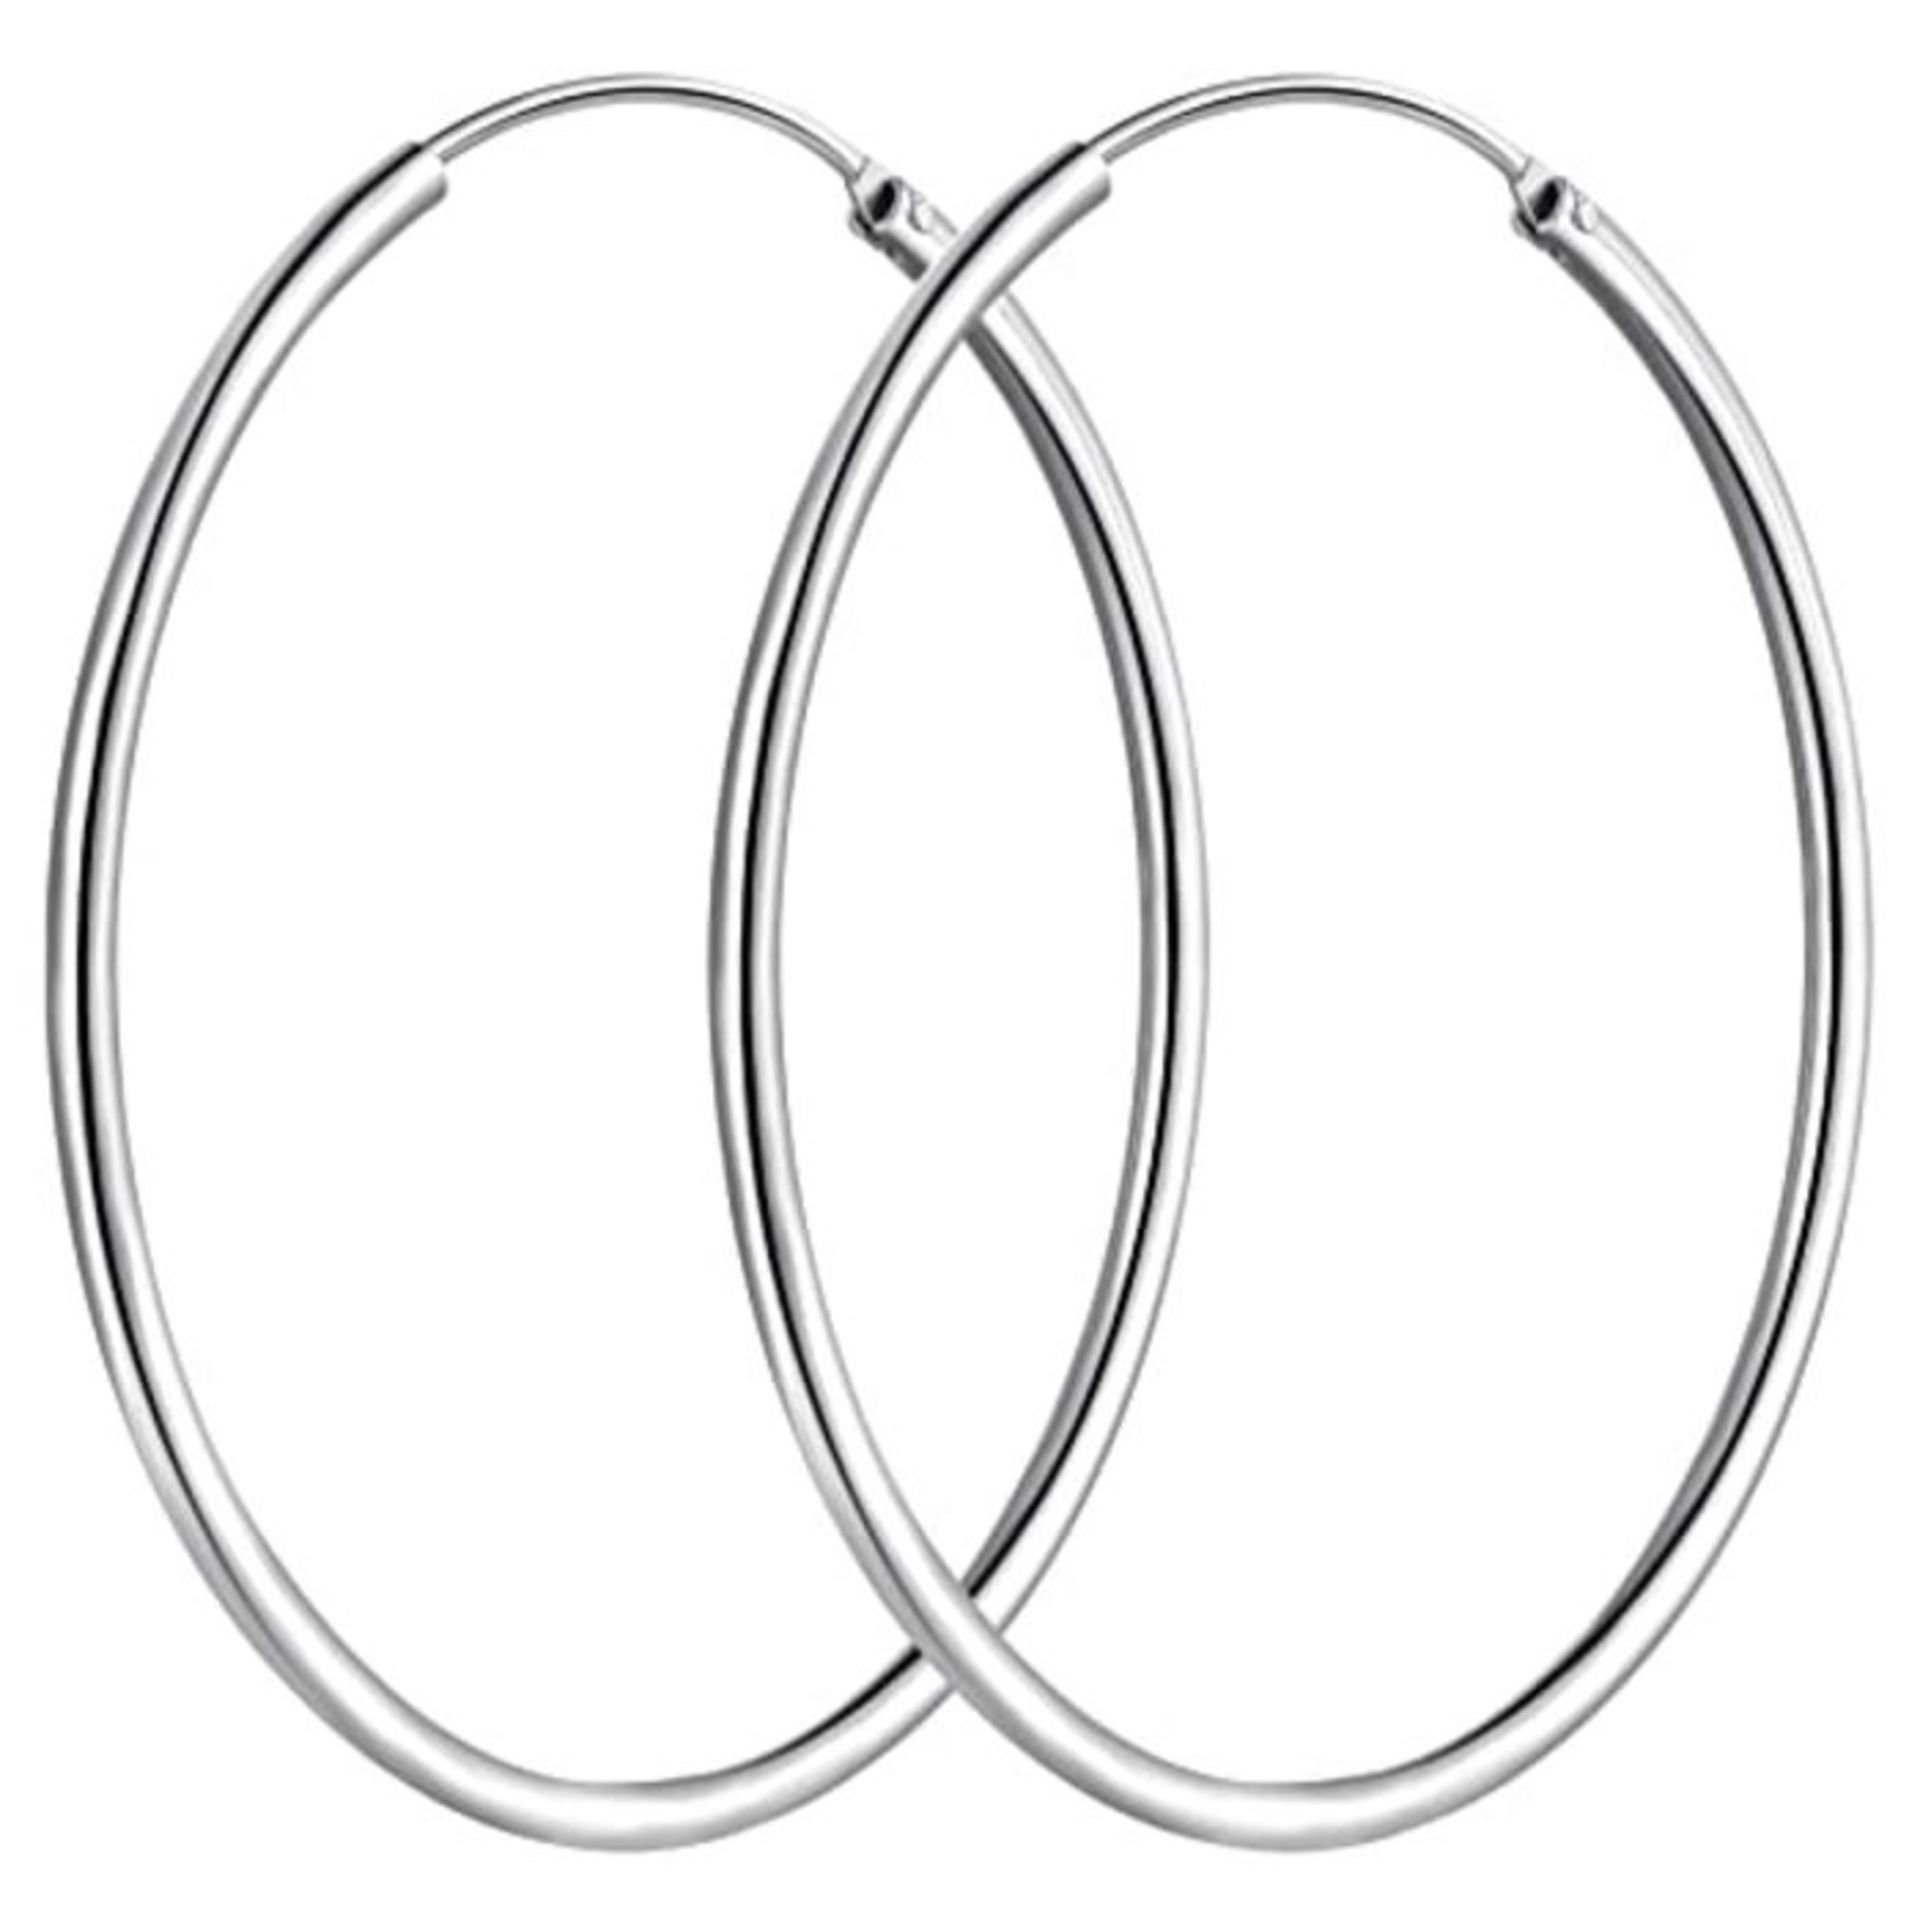 T400 Jewelers 925 Sterling Silver Polished Round Circle Endless Hoop Earrings,Size 70